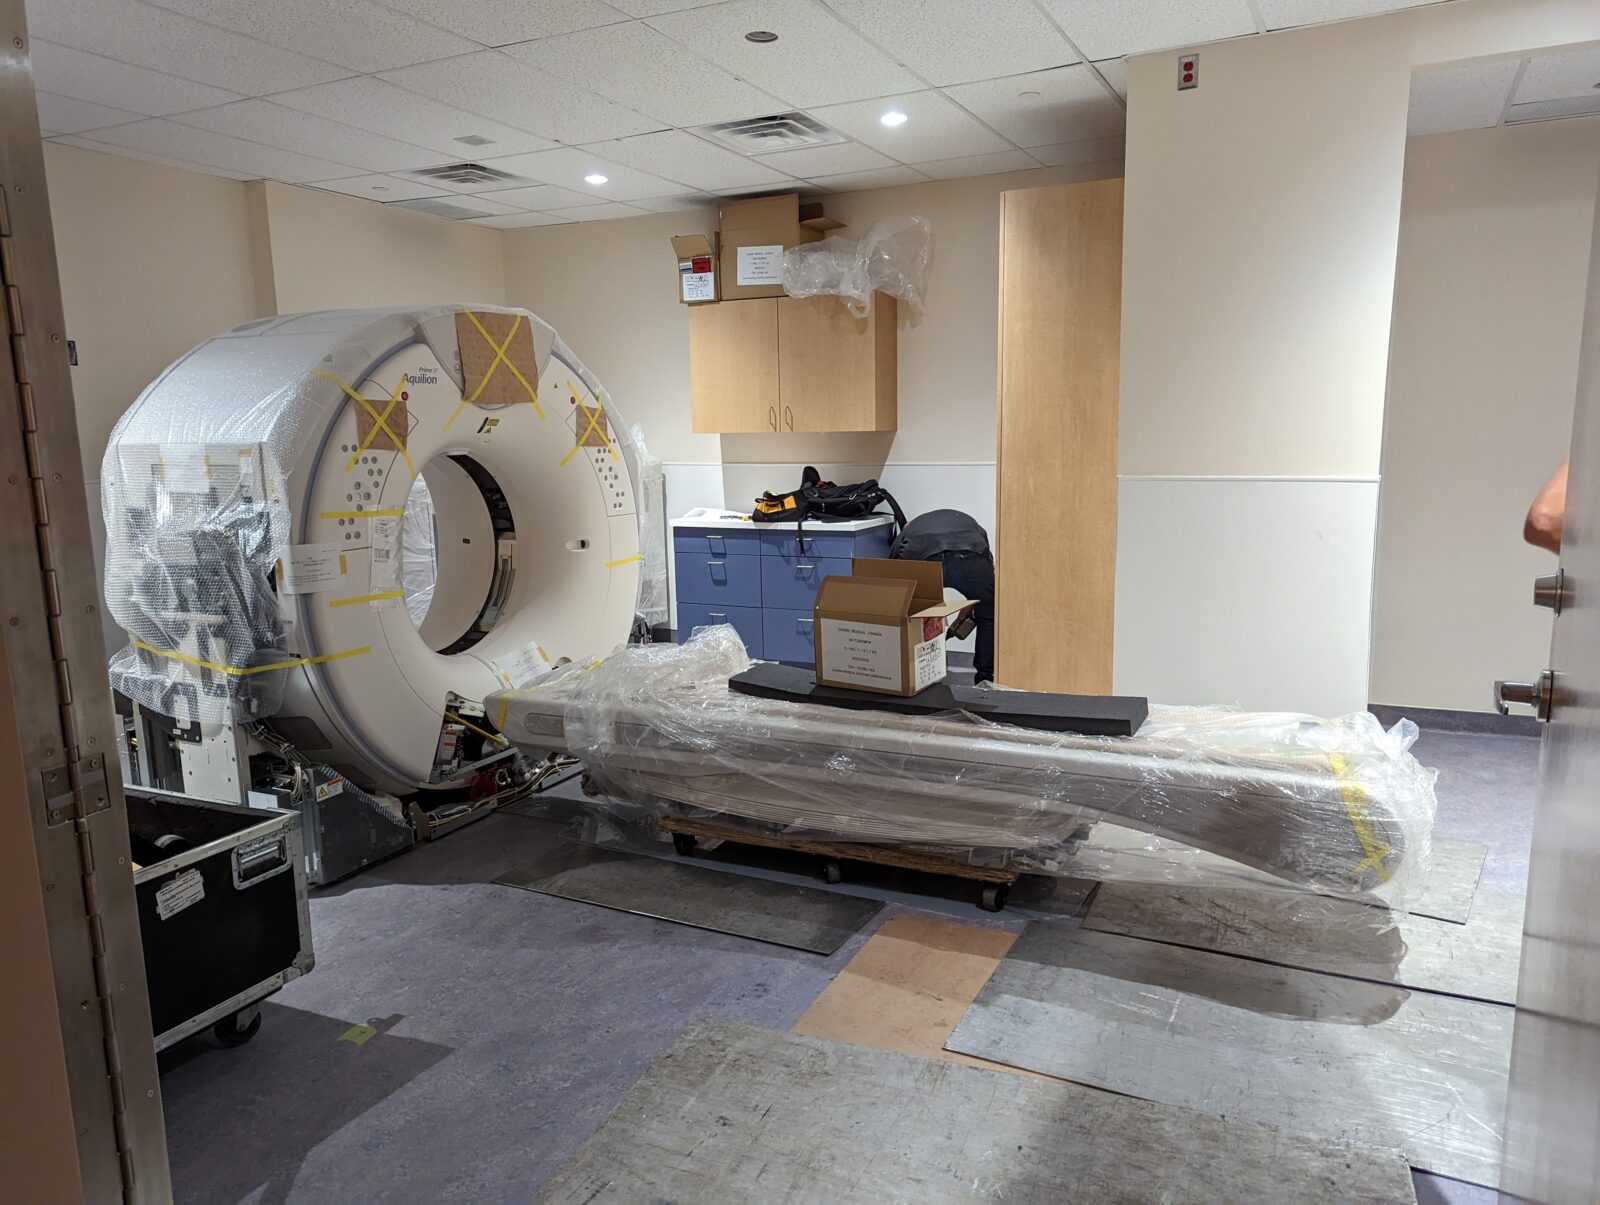 CT Scanner Just arrived - not even unpacked yet